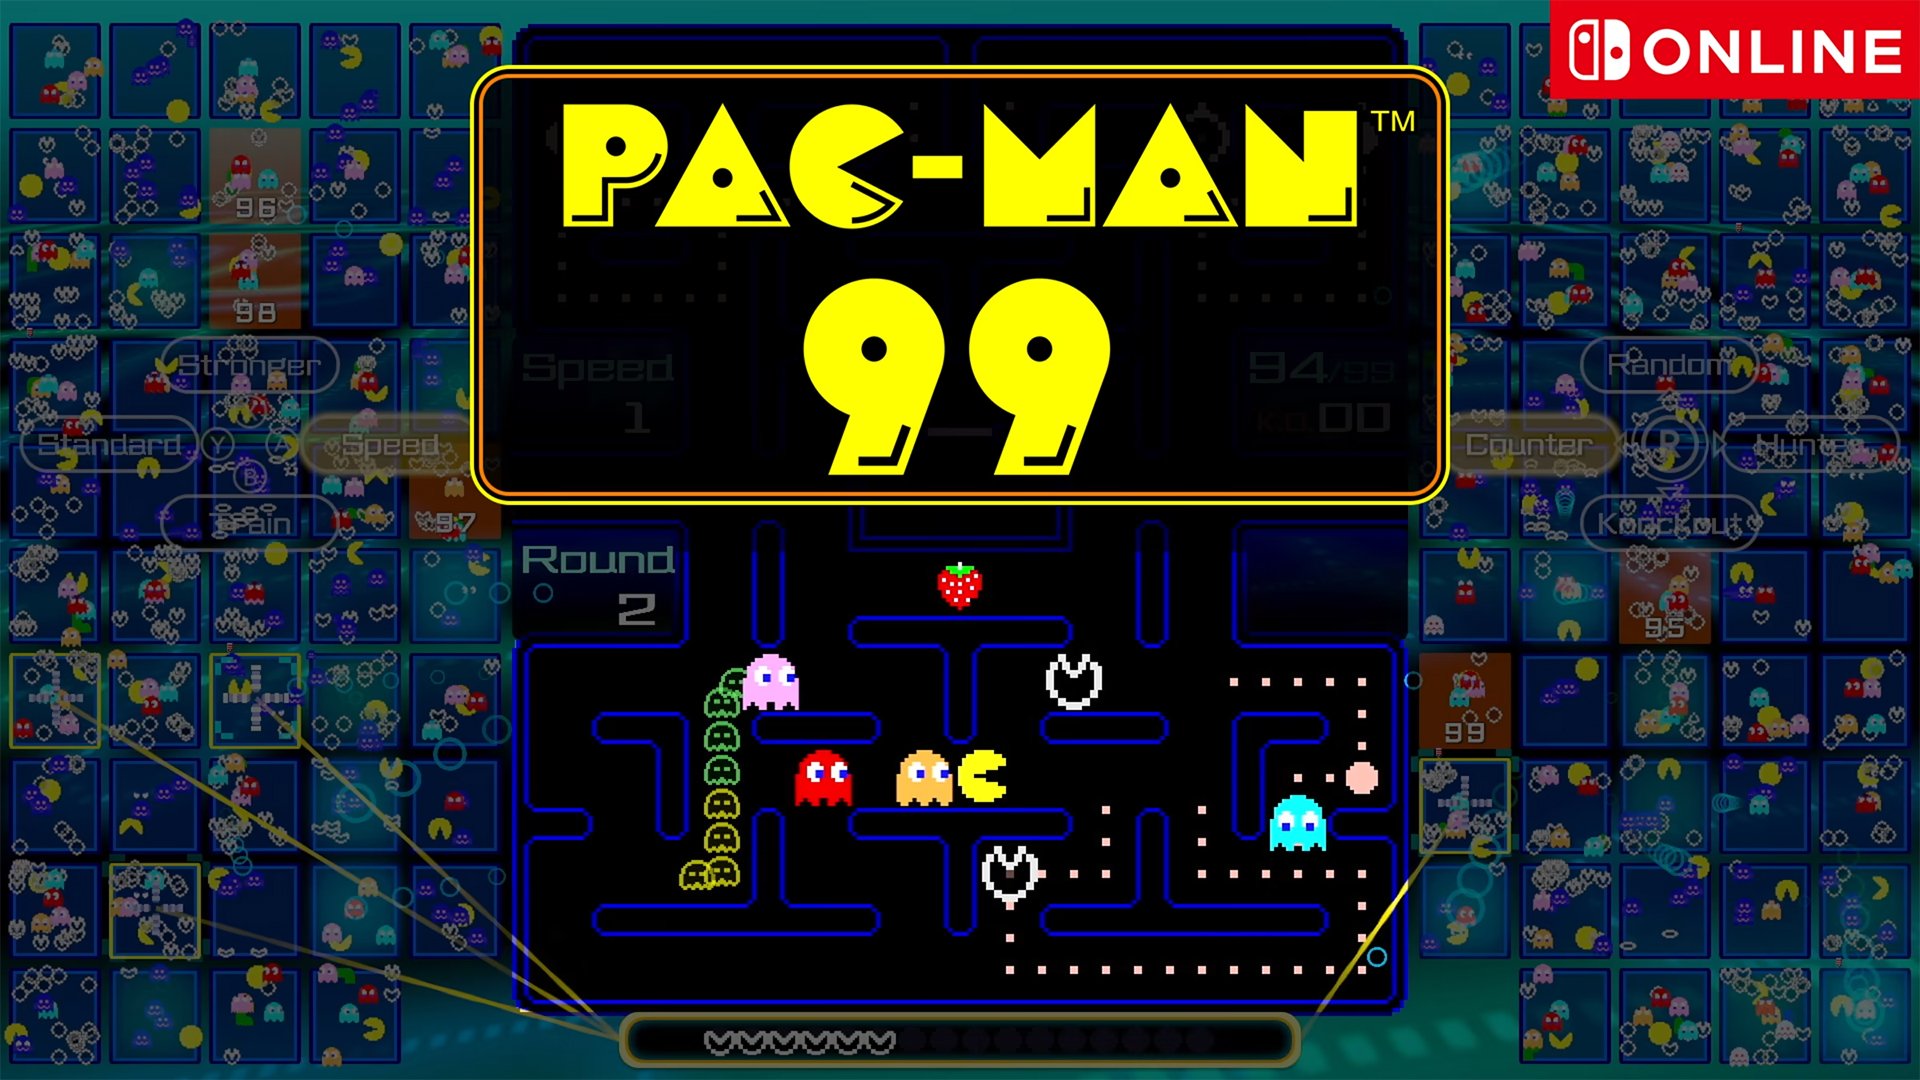 Today Afternoon at 6:30pm Nintendo Had Shut down PAC Man 99 it said th